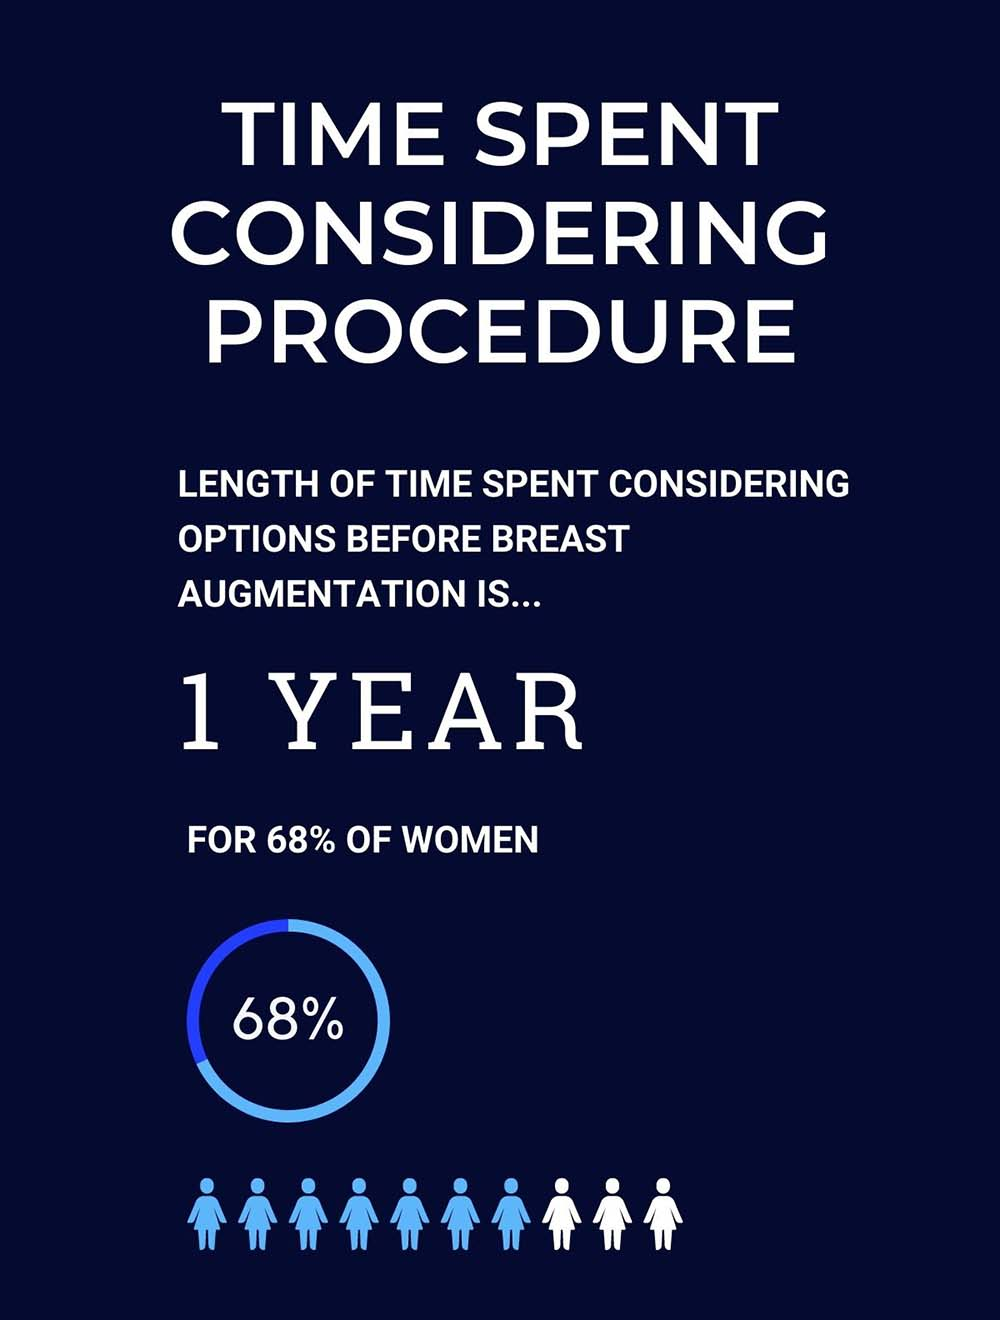 Infographic showing the time that patients spend considering options